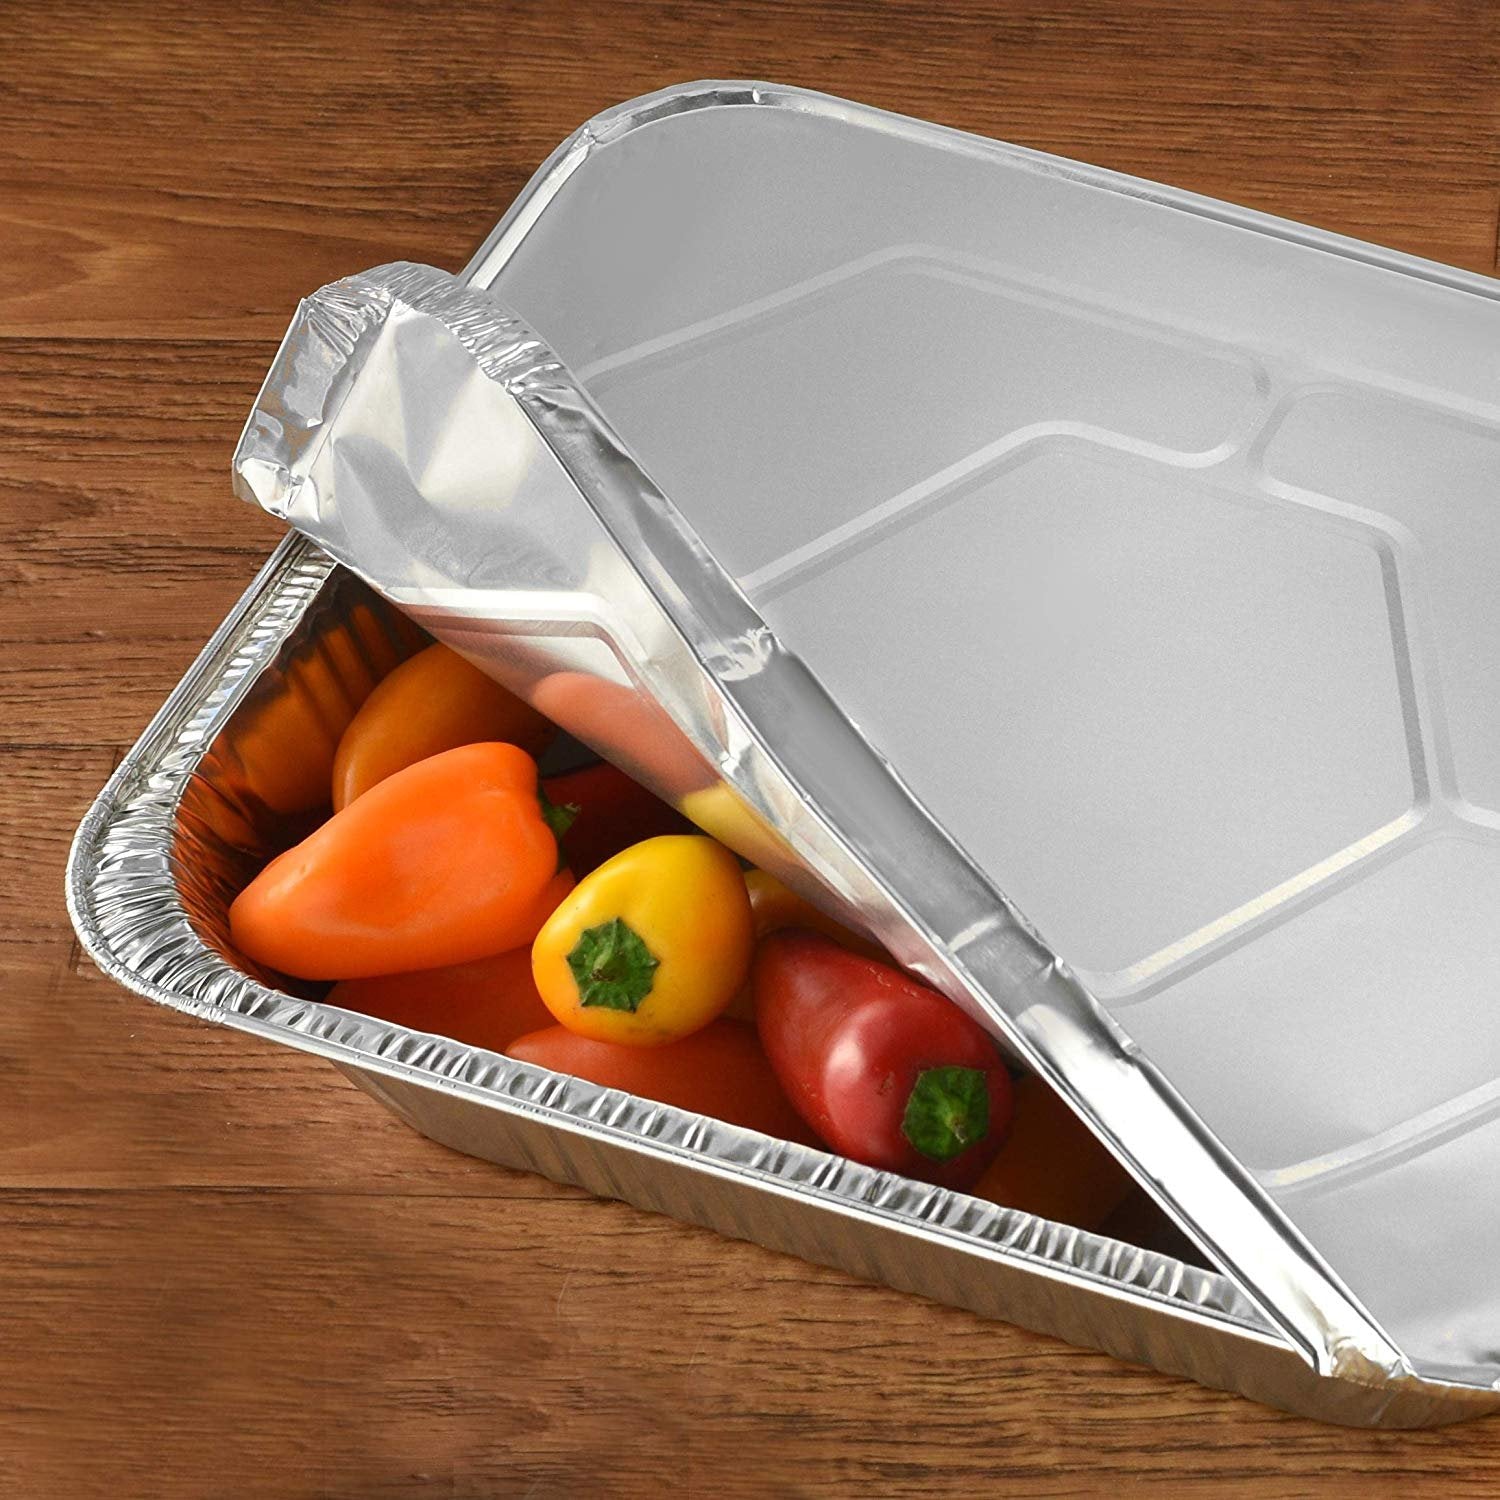 Baking Tip: The Easiest Way to Line Baking Pans with Aluminum Foil